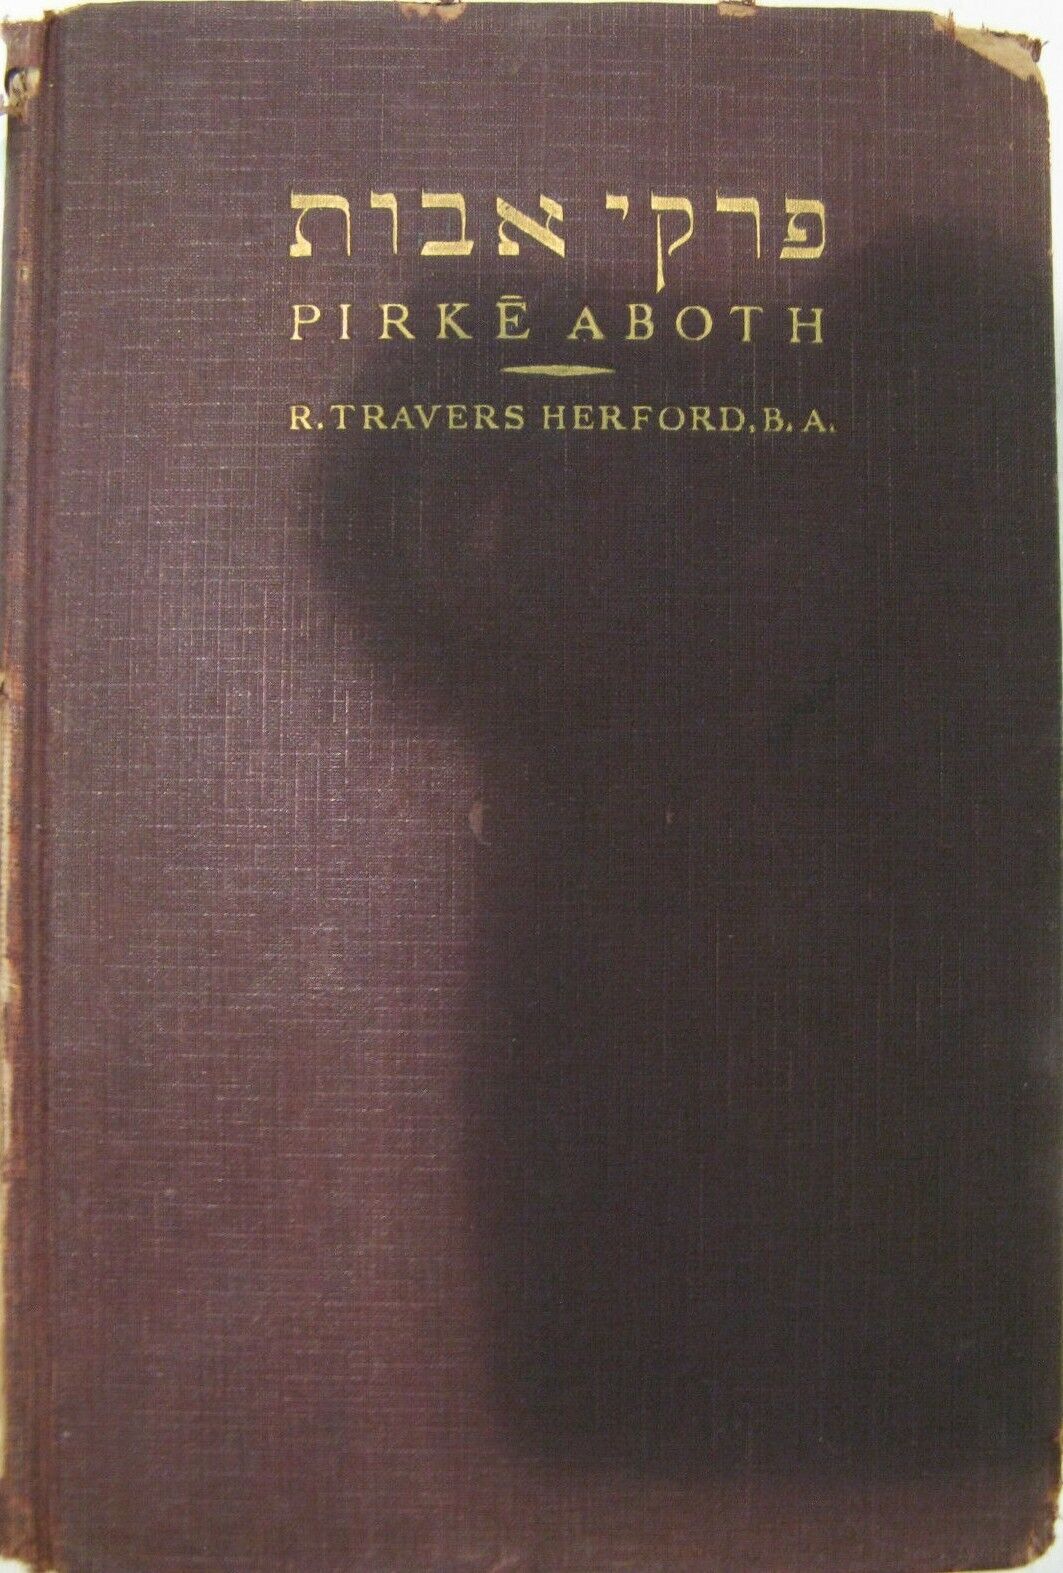 1930 Robert Travers Herford Pirke Aboth English Saying Of The Fathers Commentary